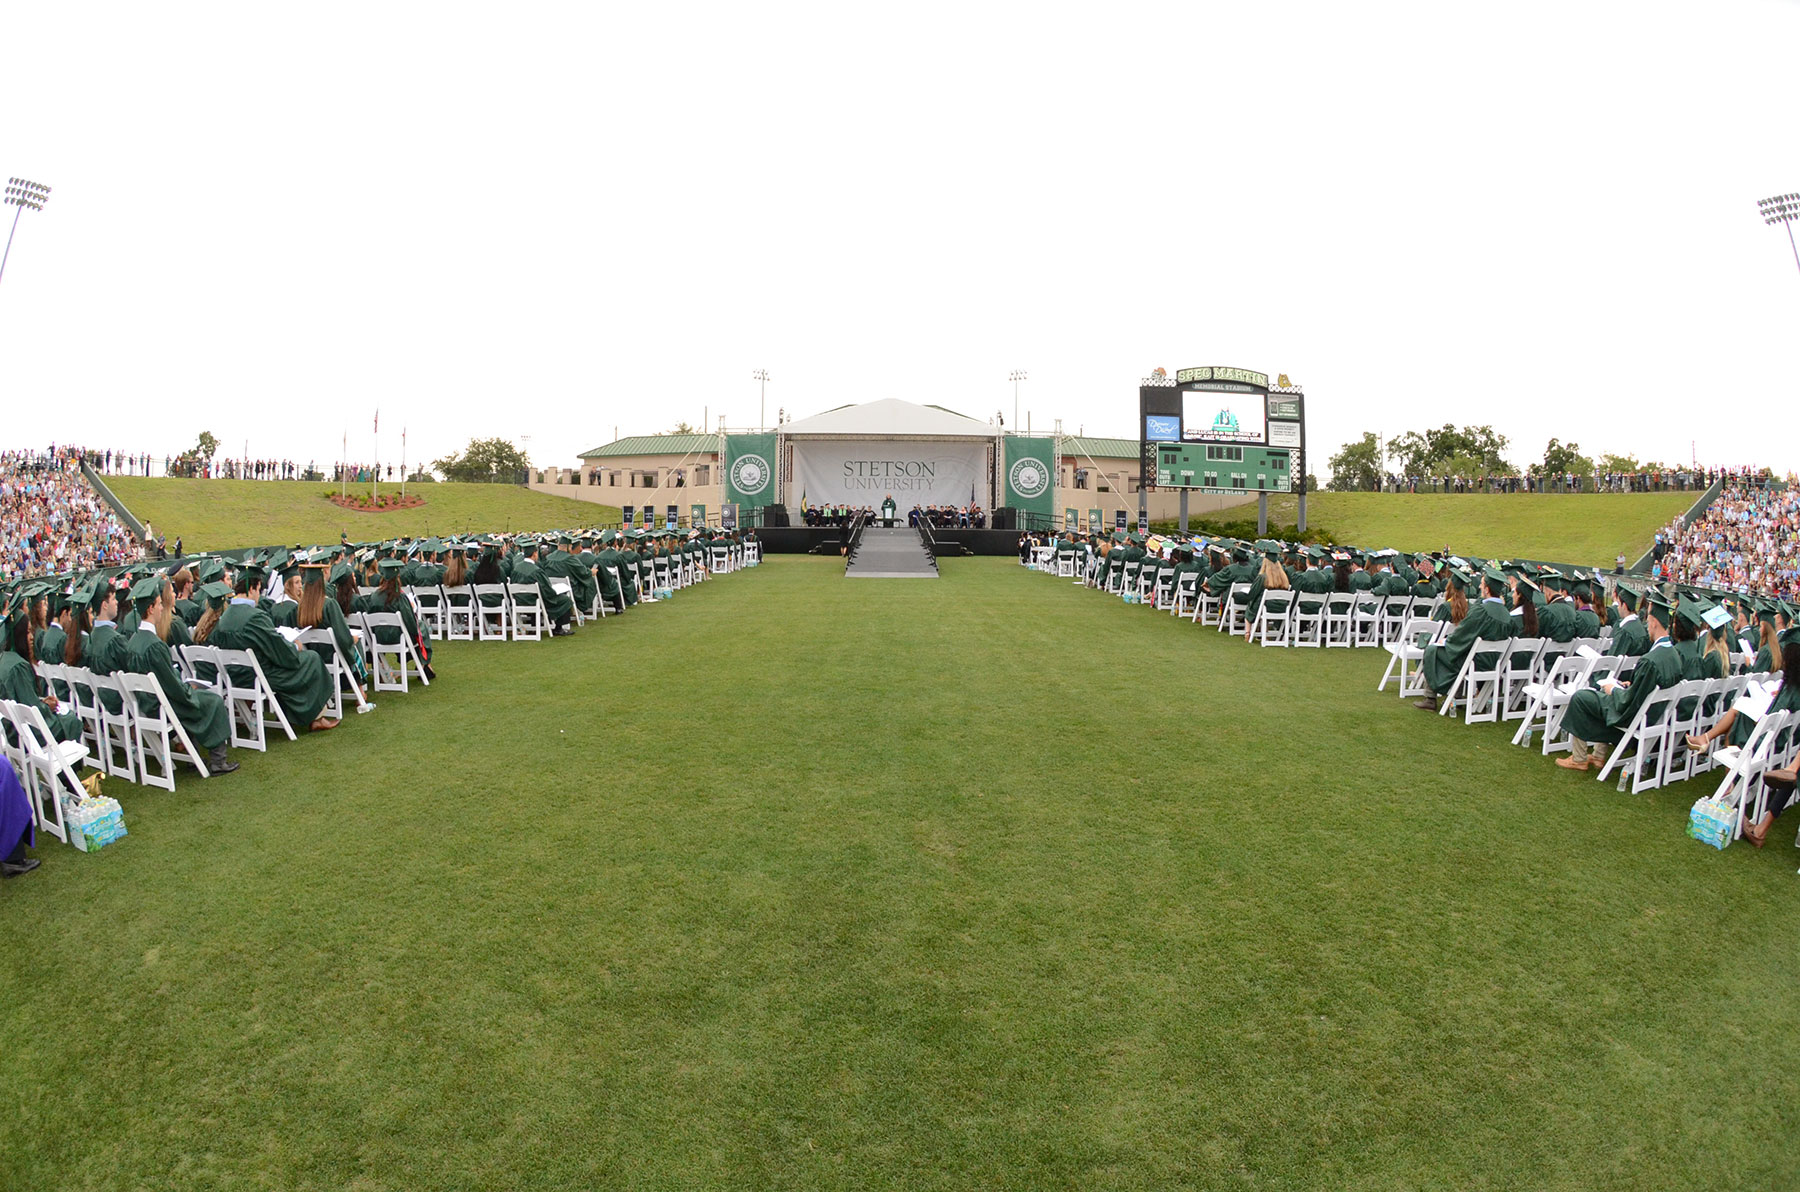 A sweeping shot of graduates and Commencement platform where students will give the Commencement address